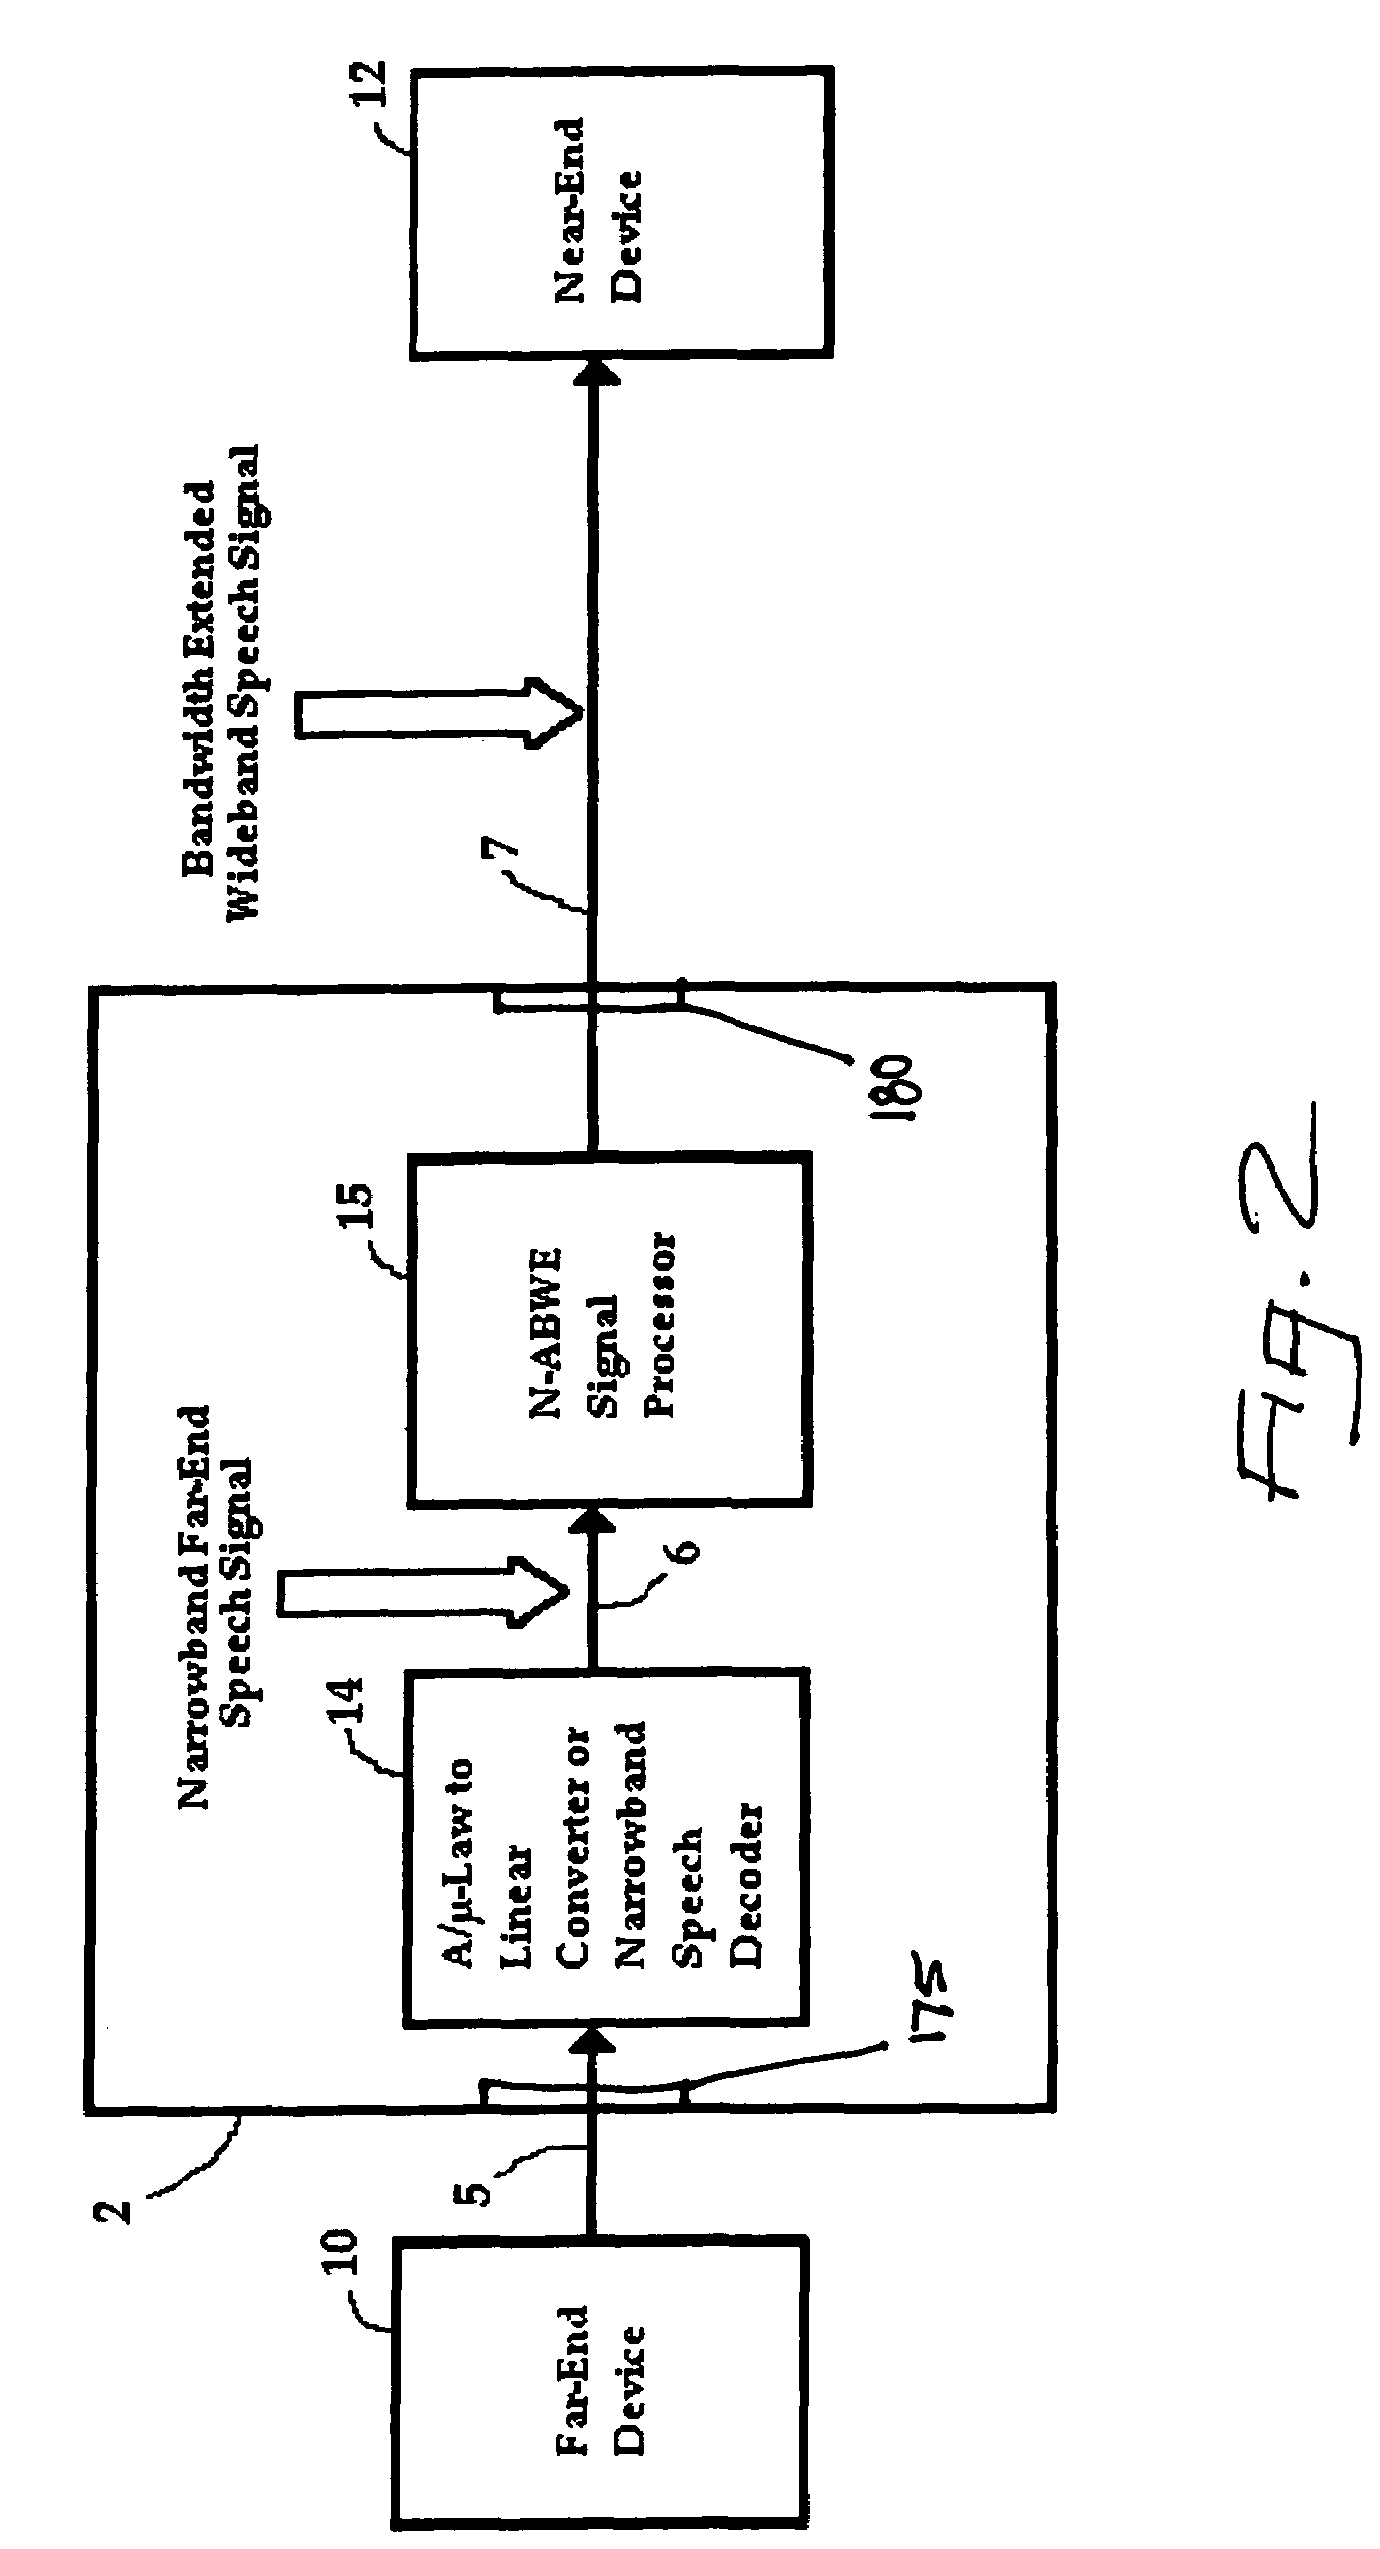 Methods and apparatus for improving the quality of speech signals